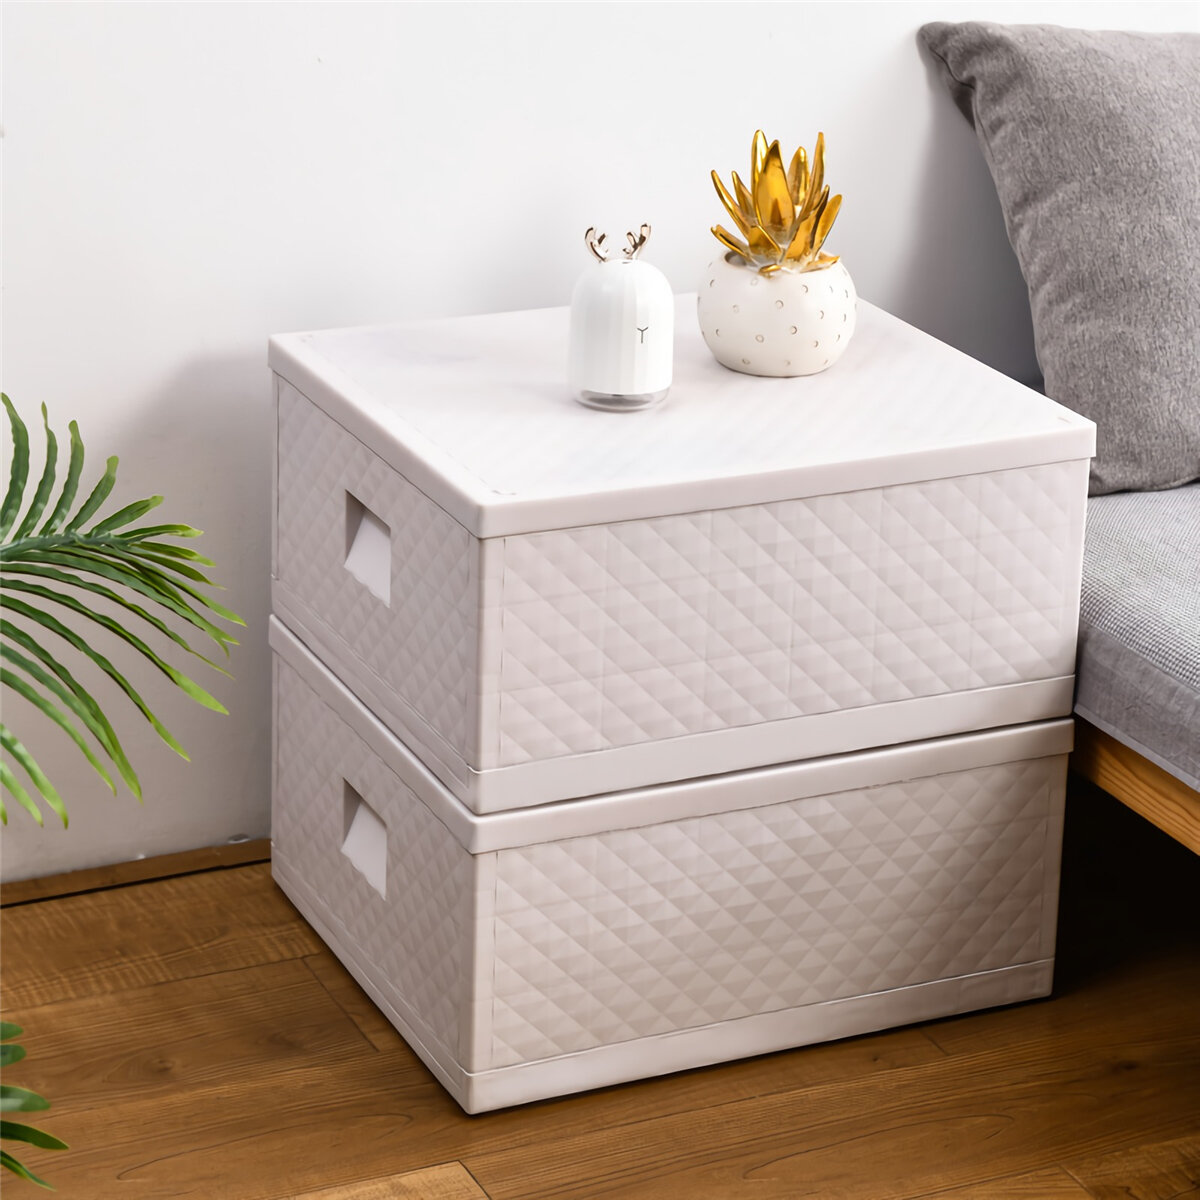 Foldable Wardrobe Storage Box Multi-purpose Home Office Car Storage Case Bedside End Table Nightstand Toys Clothes Stora